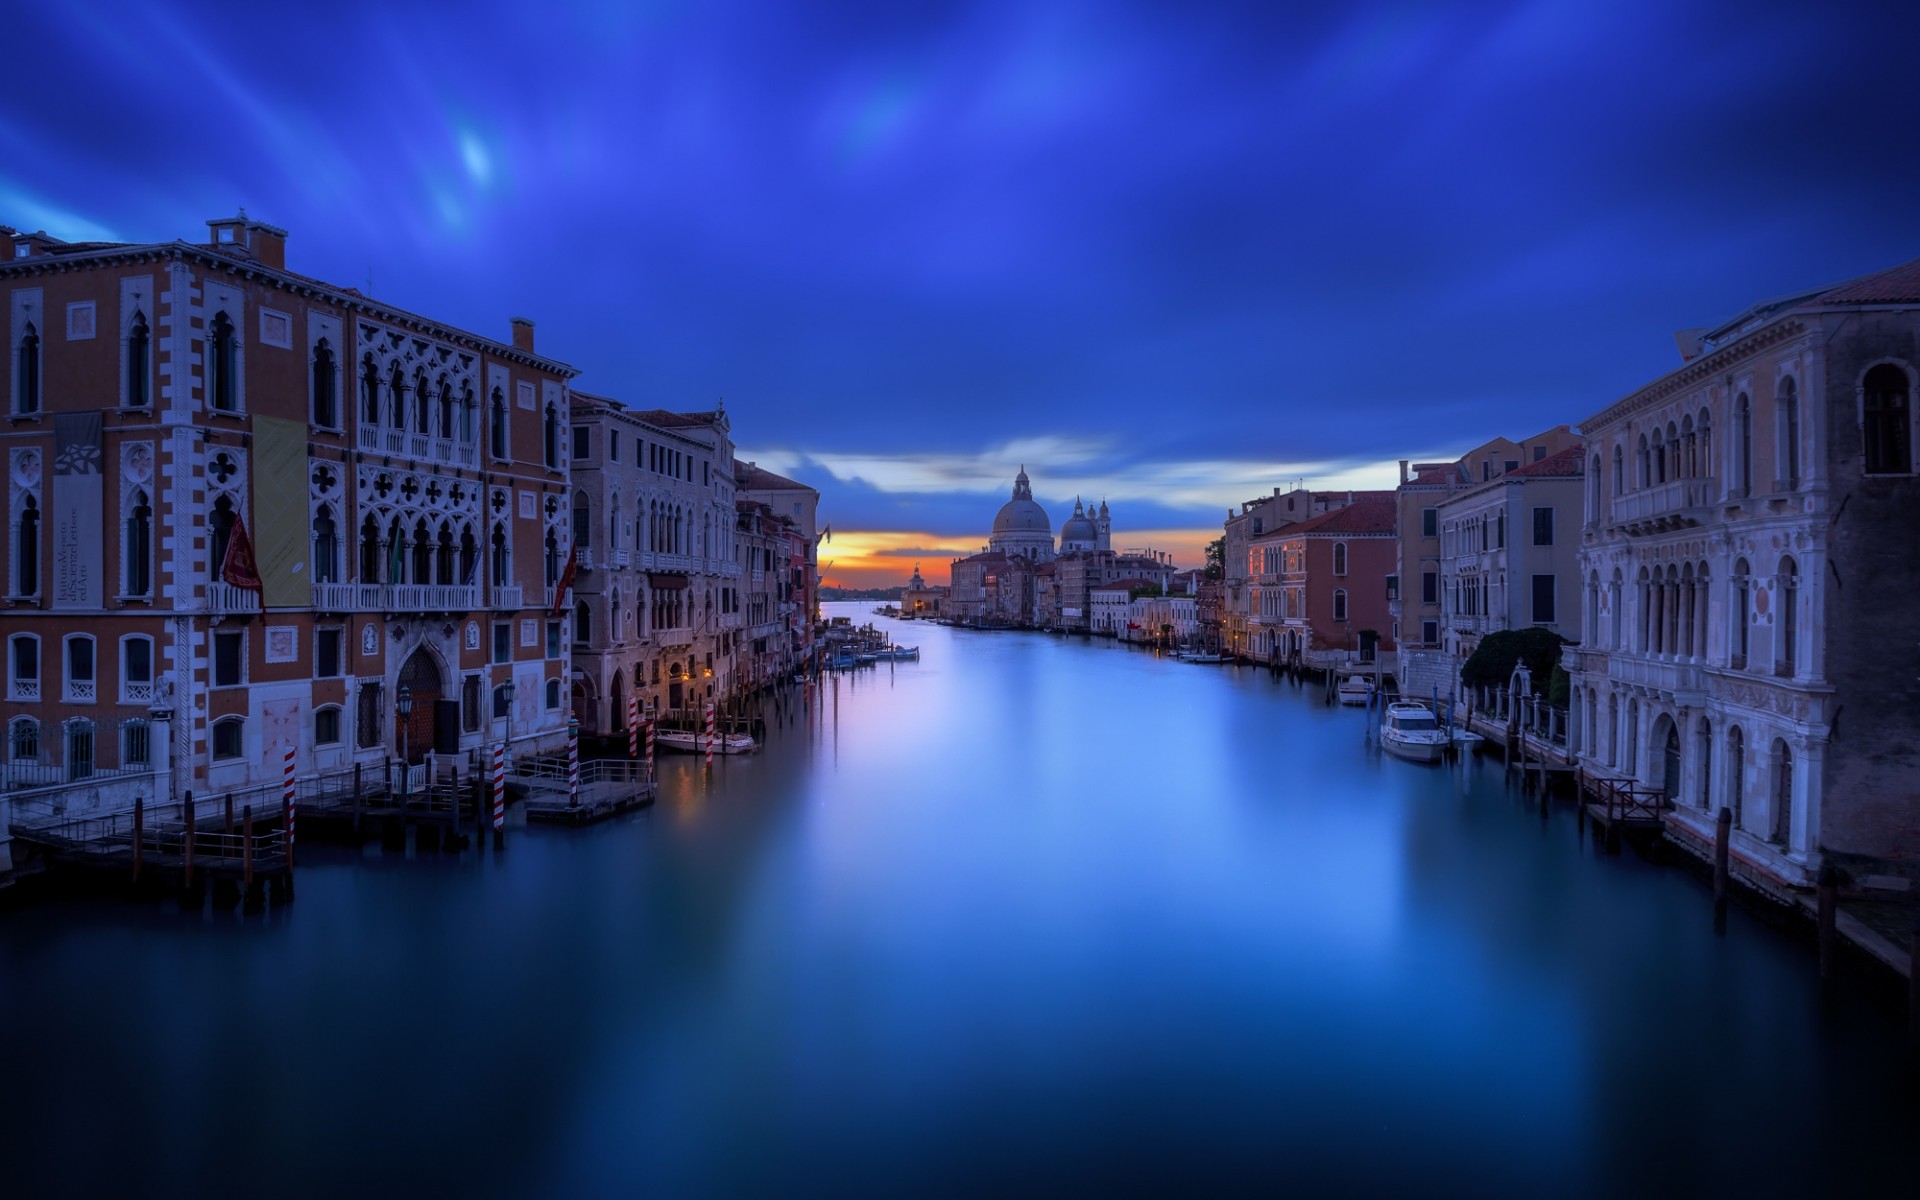 venice, architecture, man made, building, dusk, grand canal, cities